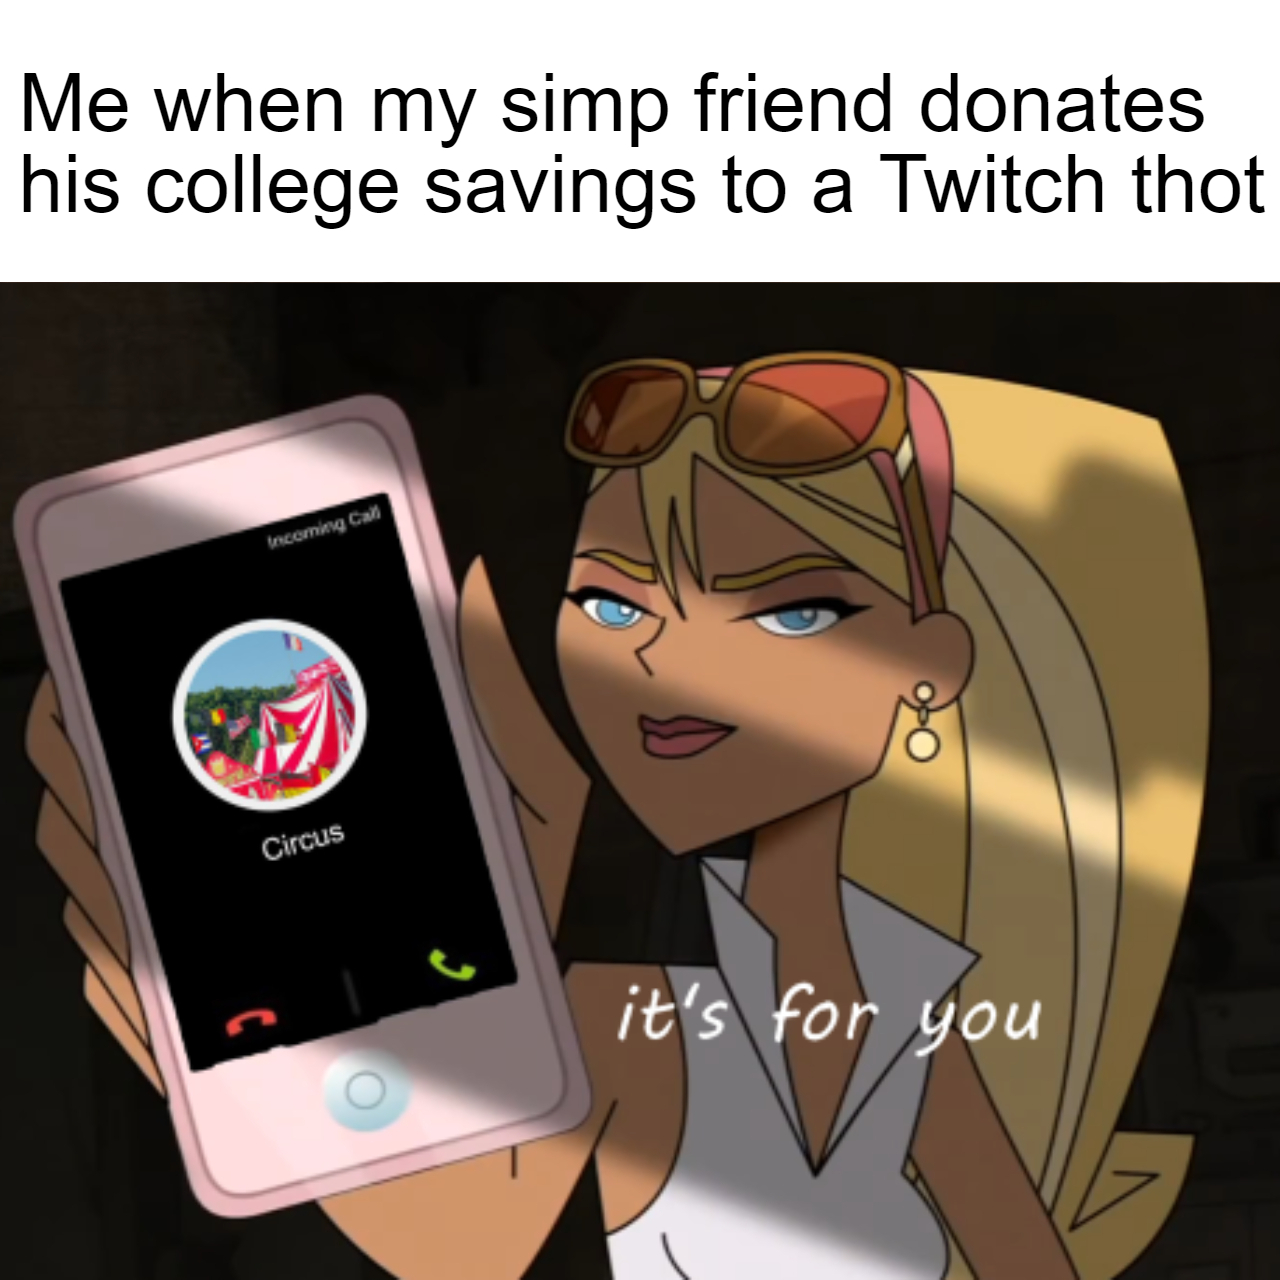 funny gaming memes  - cartoon - Me when my simp friend donates his college savings to a Twitch thot com a Circus it's for you